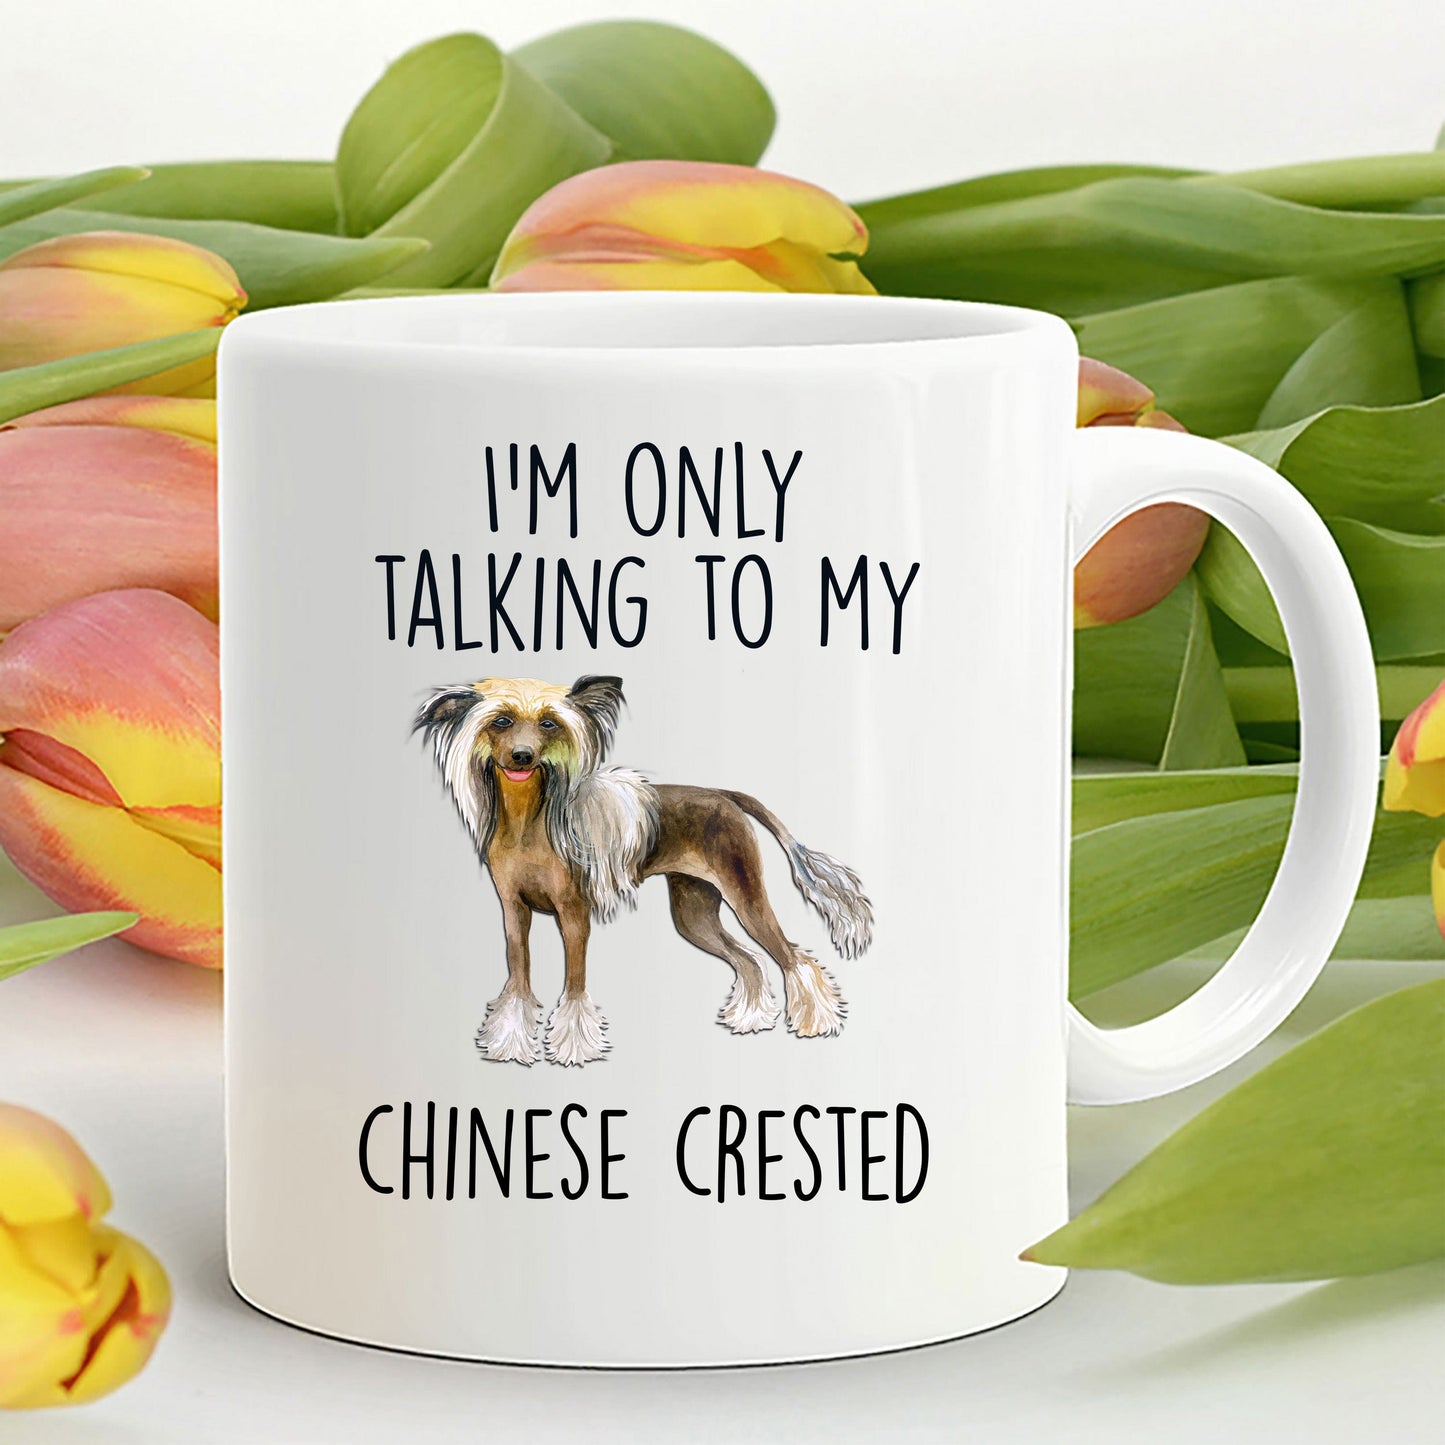 Chinese Crested Dog Funny Ceramic Coffee Mug - I'm Only Talking to My Chinese Crested